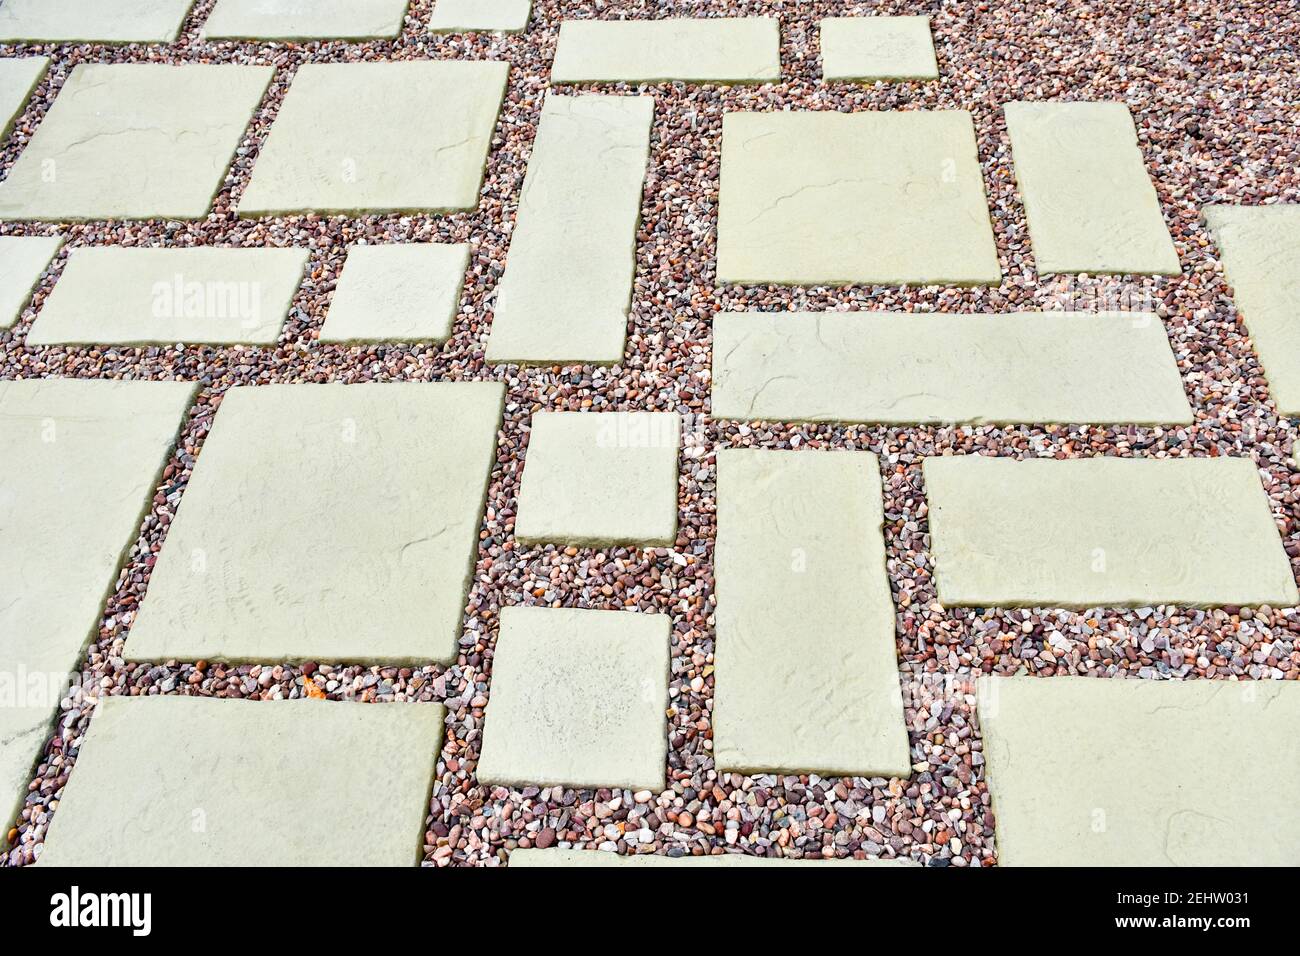 A lovely patio area with light coloured stone slabs and gravel with pinkish tones in an asymmetric pattern Stock Photo